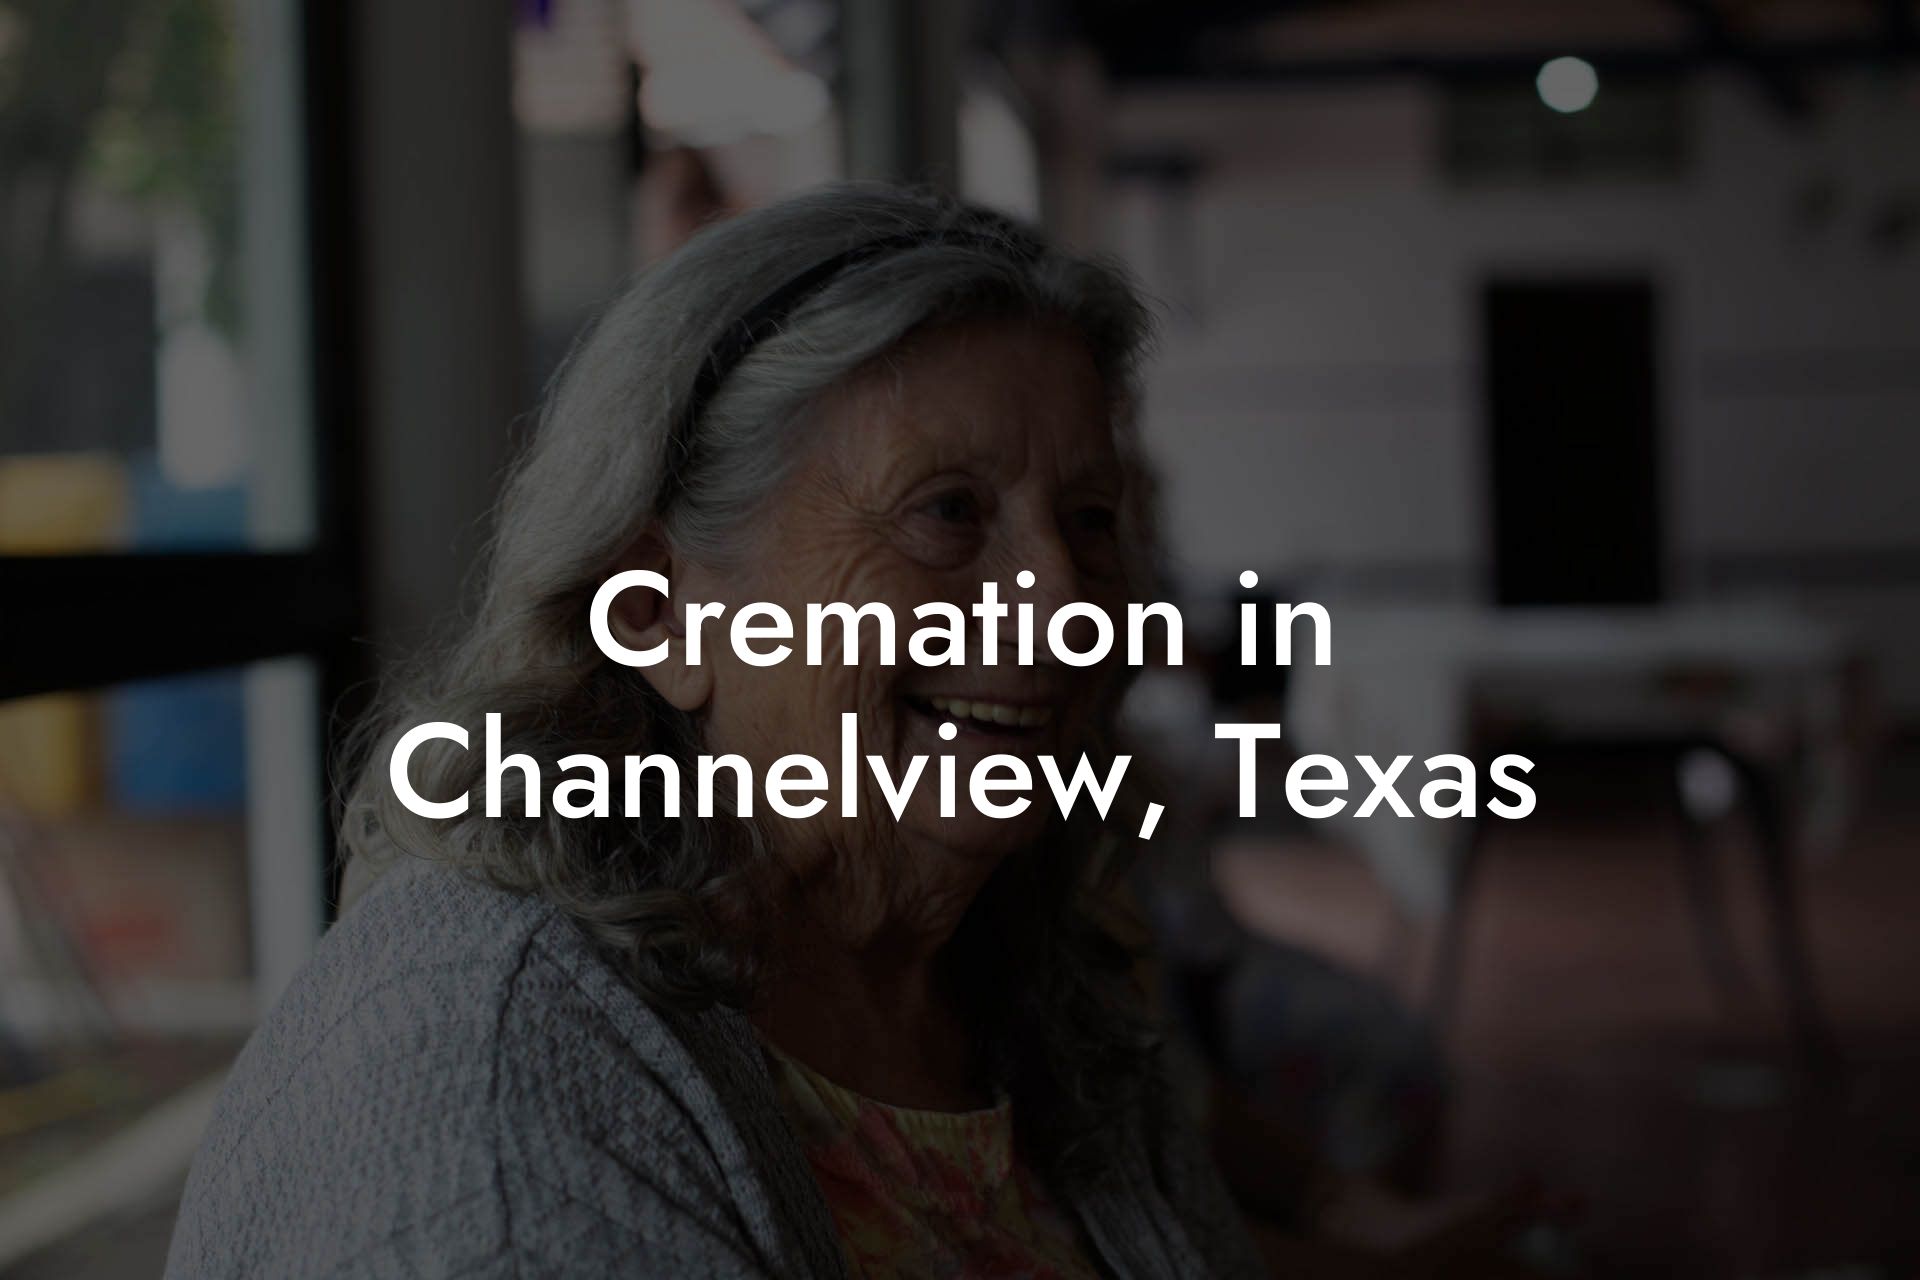 Cremation in Channelview, Texas